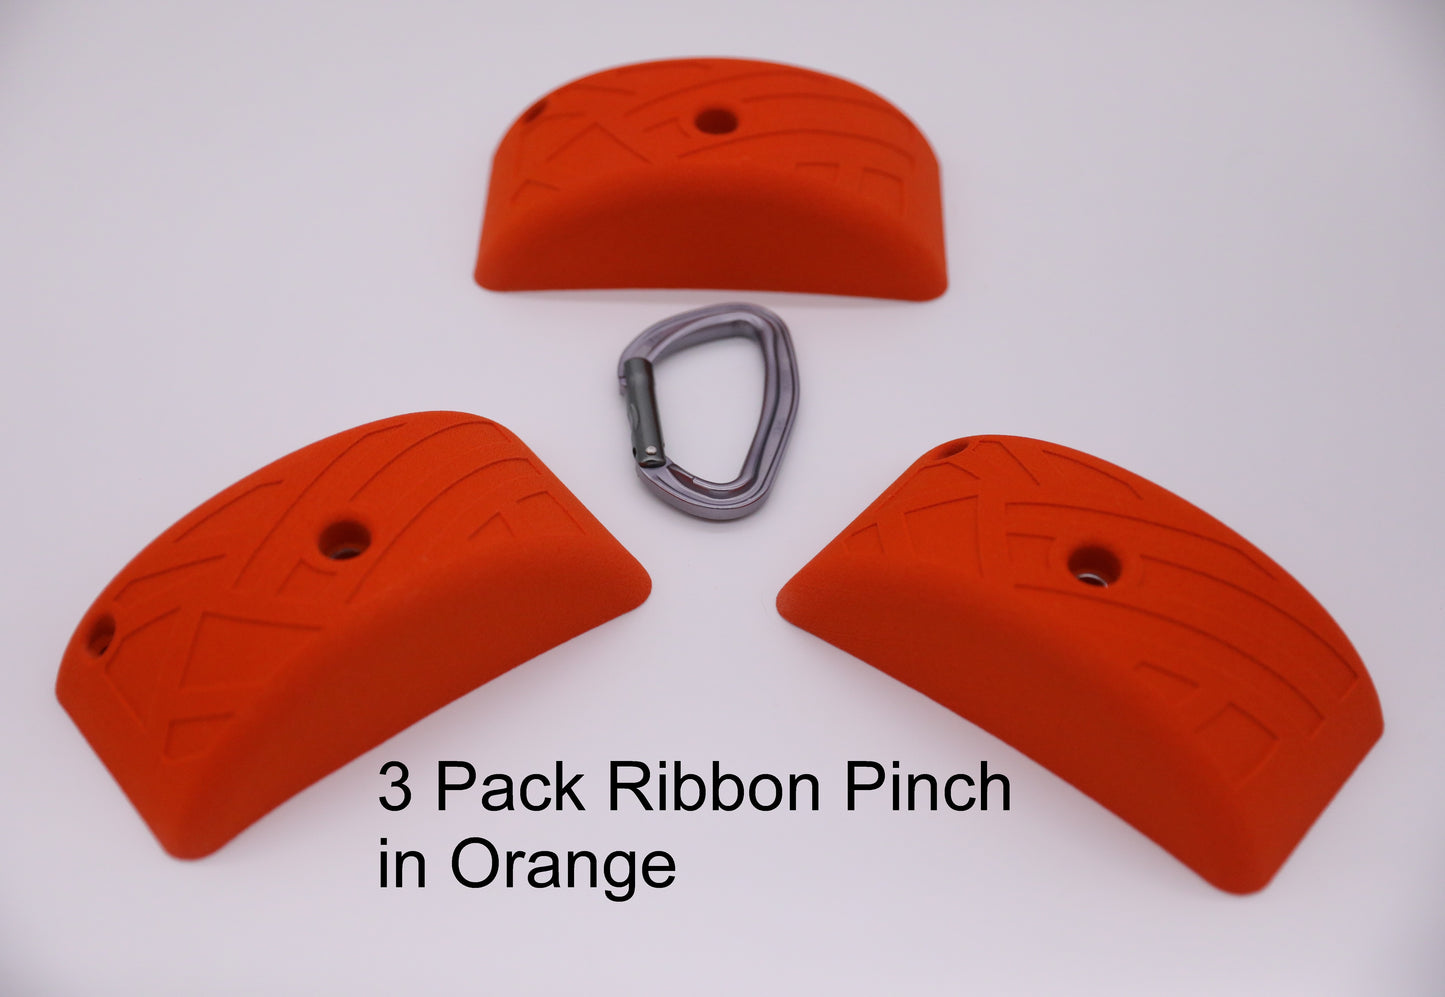 Ribbon Pinch Pack, 3 Bolt On Climbing Holds